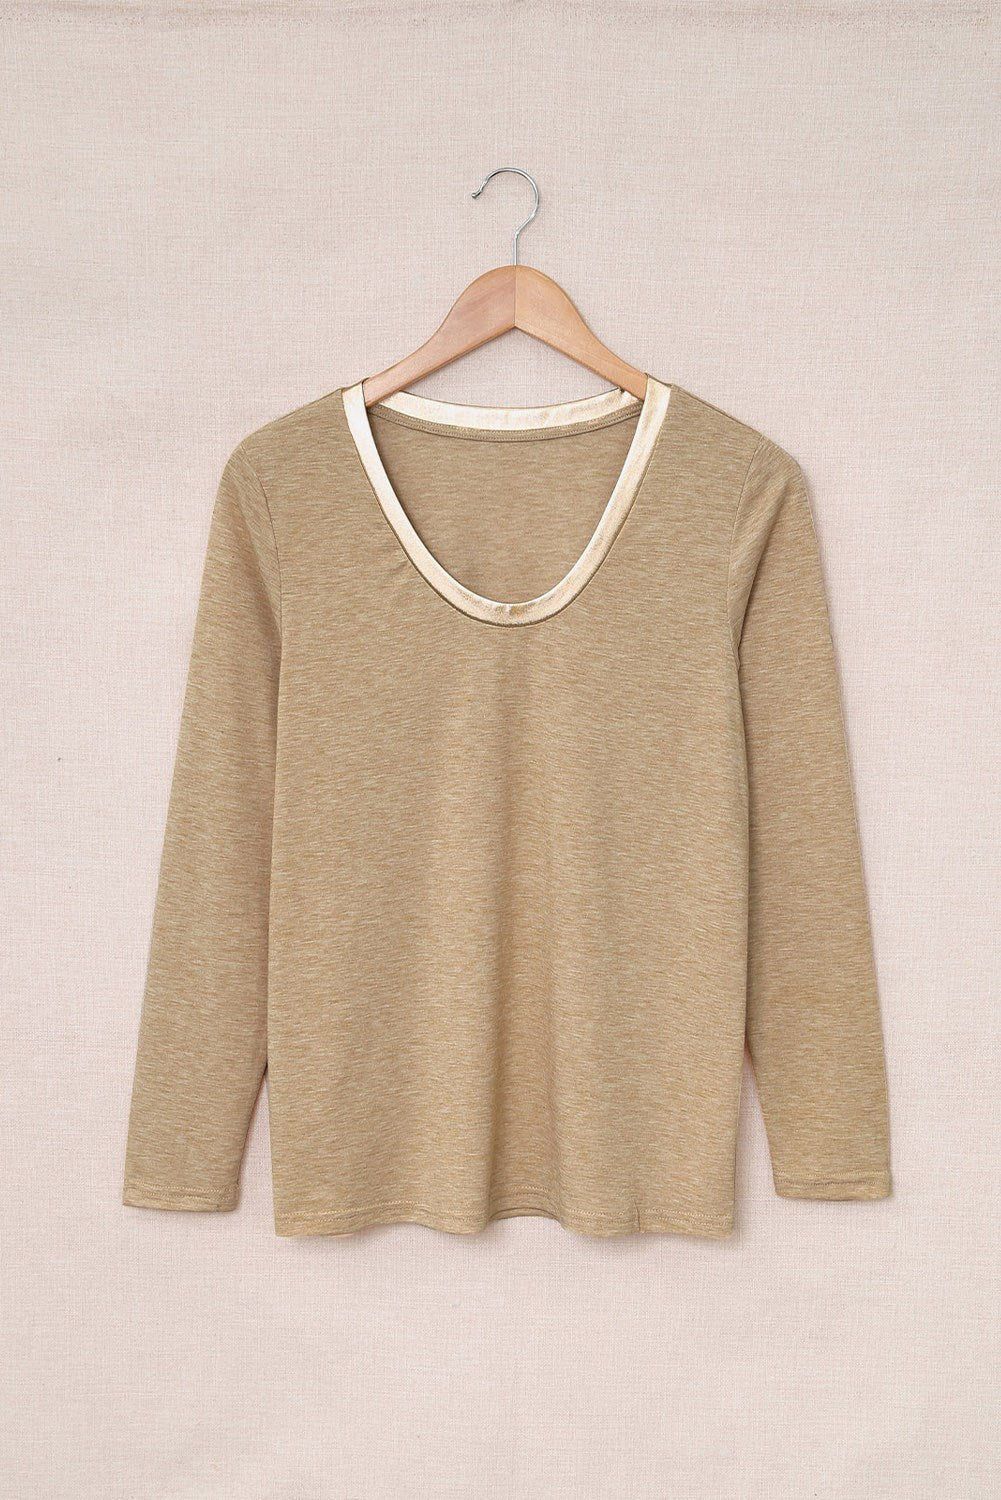 Ring Neck Long Sleeve Top